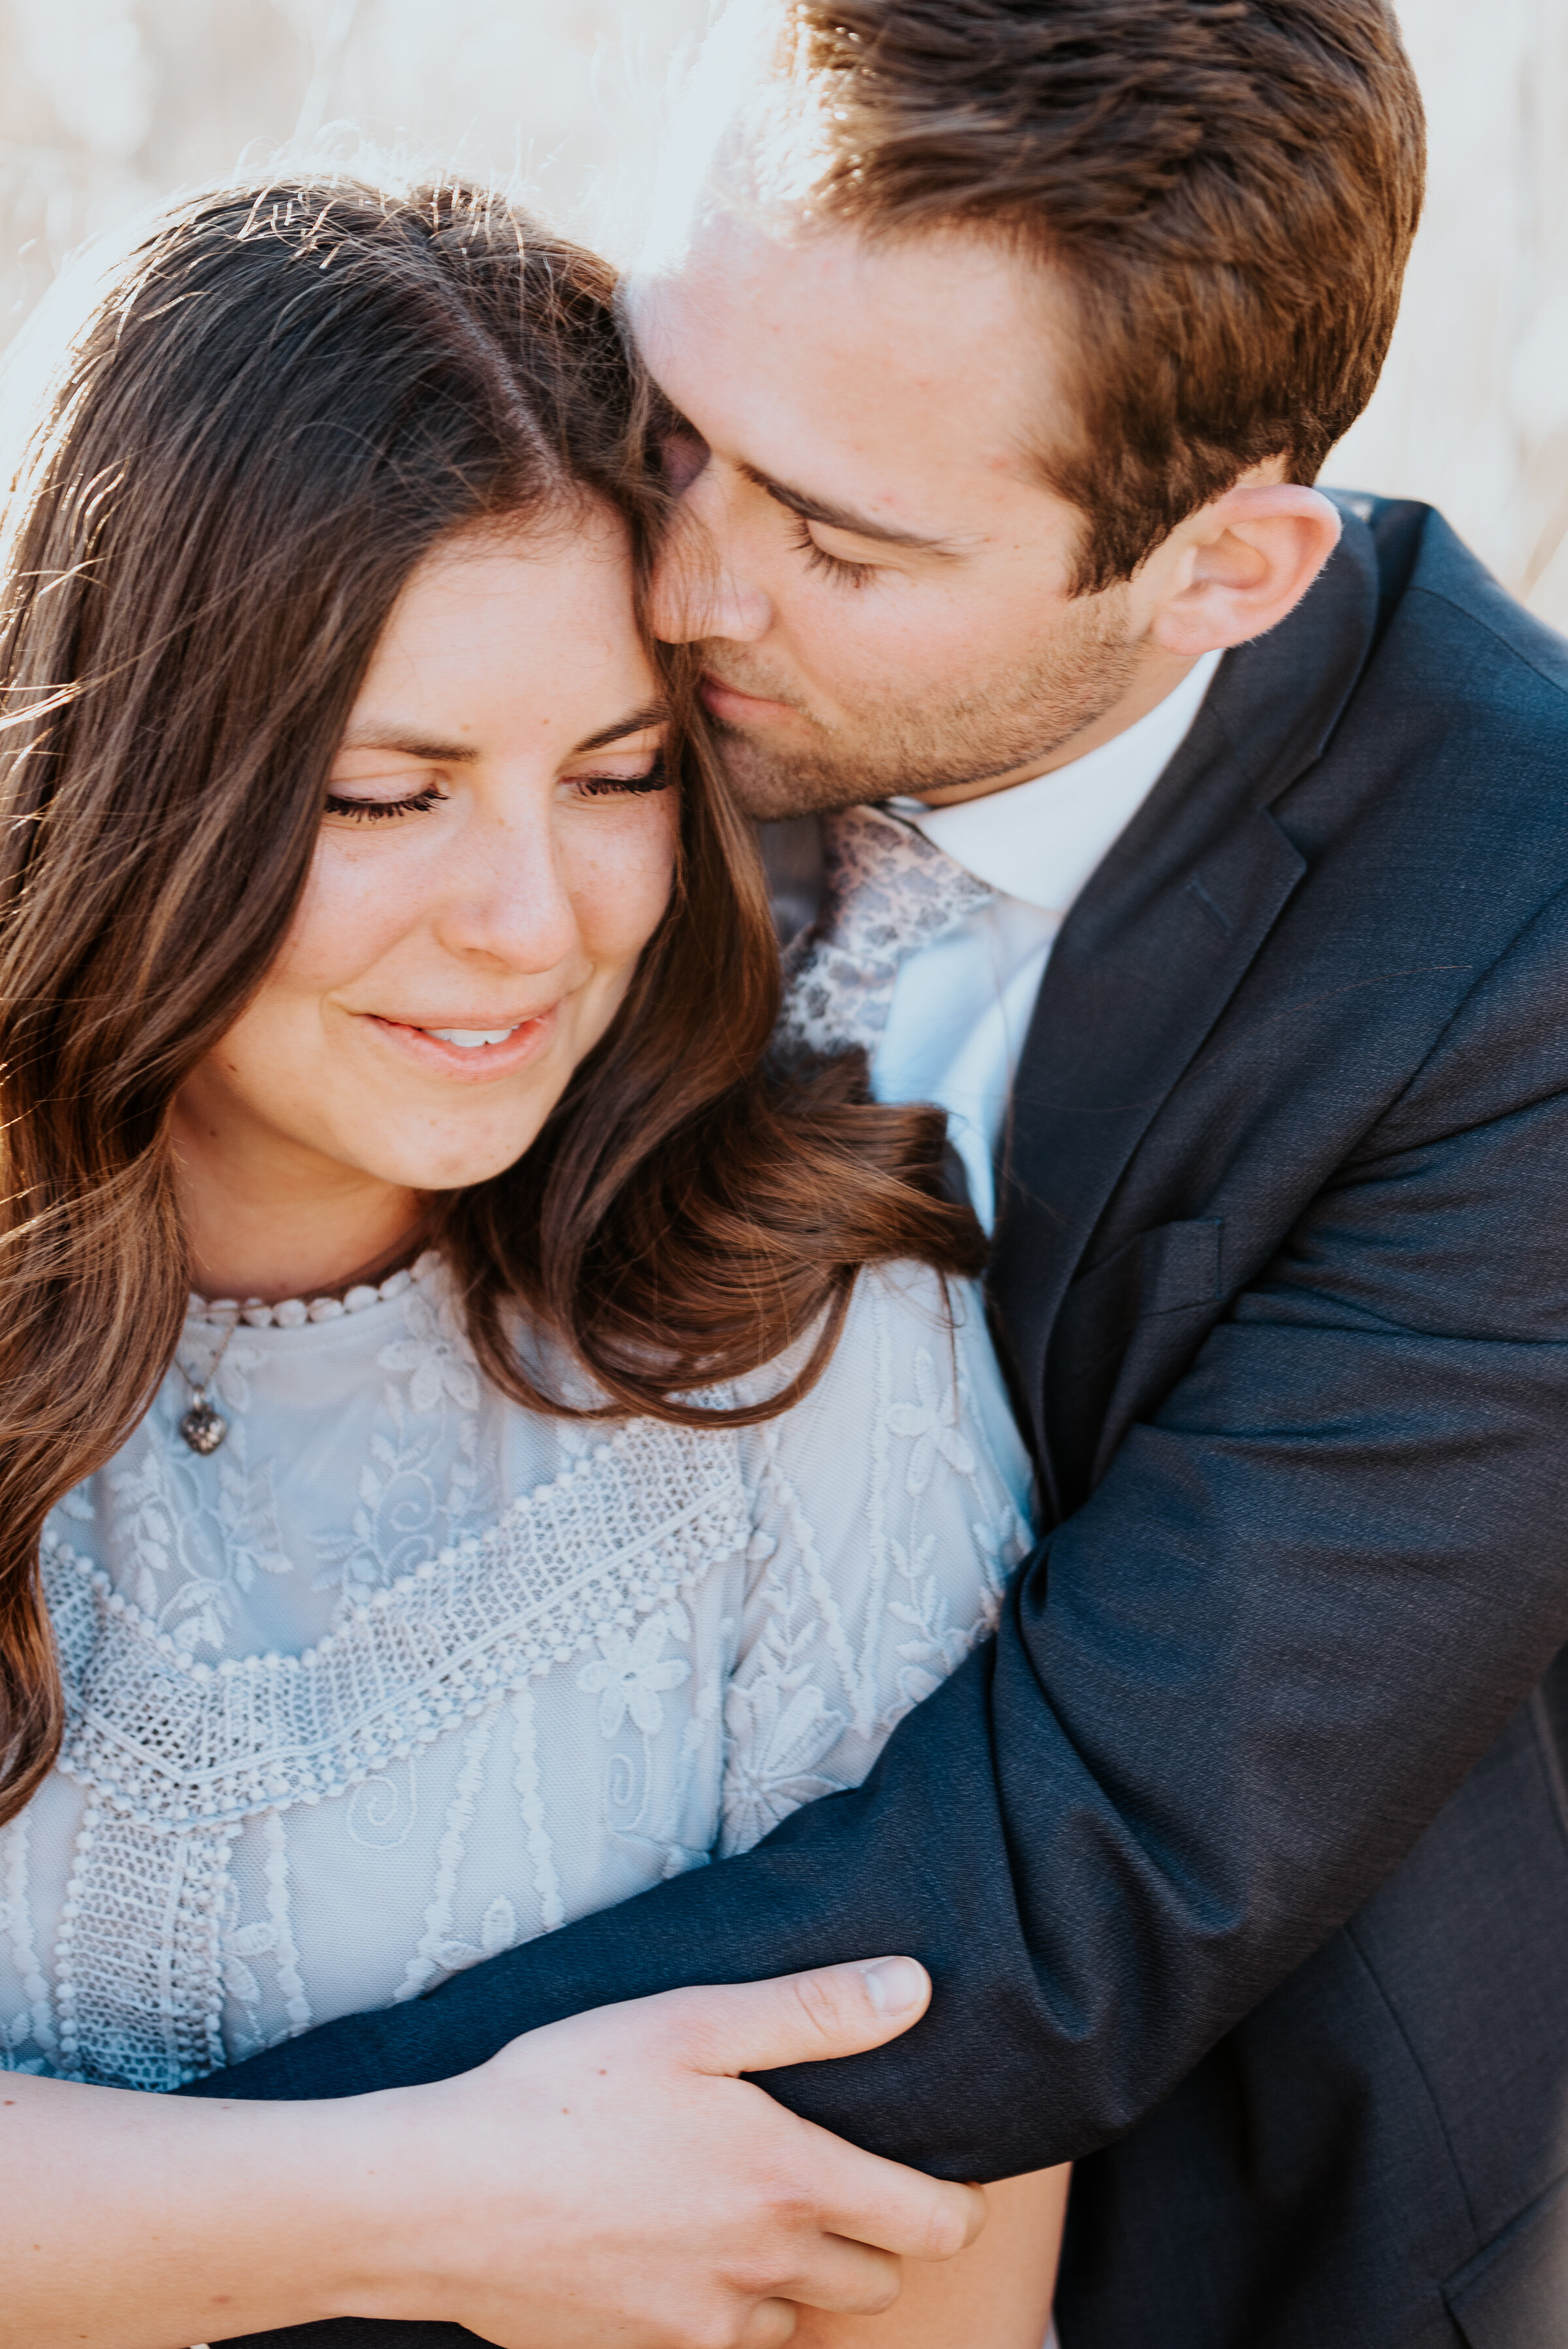  Man kisses his future brides hair in a stunning engagement photo perfect for a custom guest book. Photos by Kristi Alyse Photography stunning engagement inspiration engagement hair ideas formal engagement photoshoot #weddinginspo #engagementinspo #kristialysephotography #hairideas #futurebride #futuregroom #engagementphotos #kristialysephotography #formalengagement #bestphotographer #stunning 